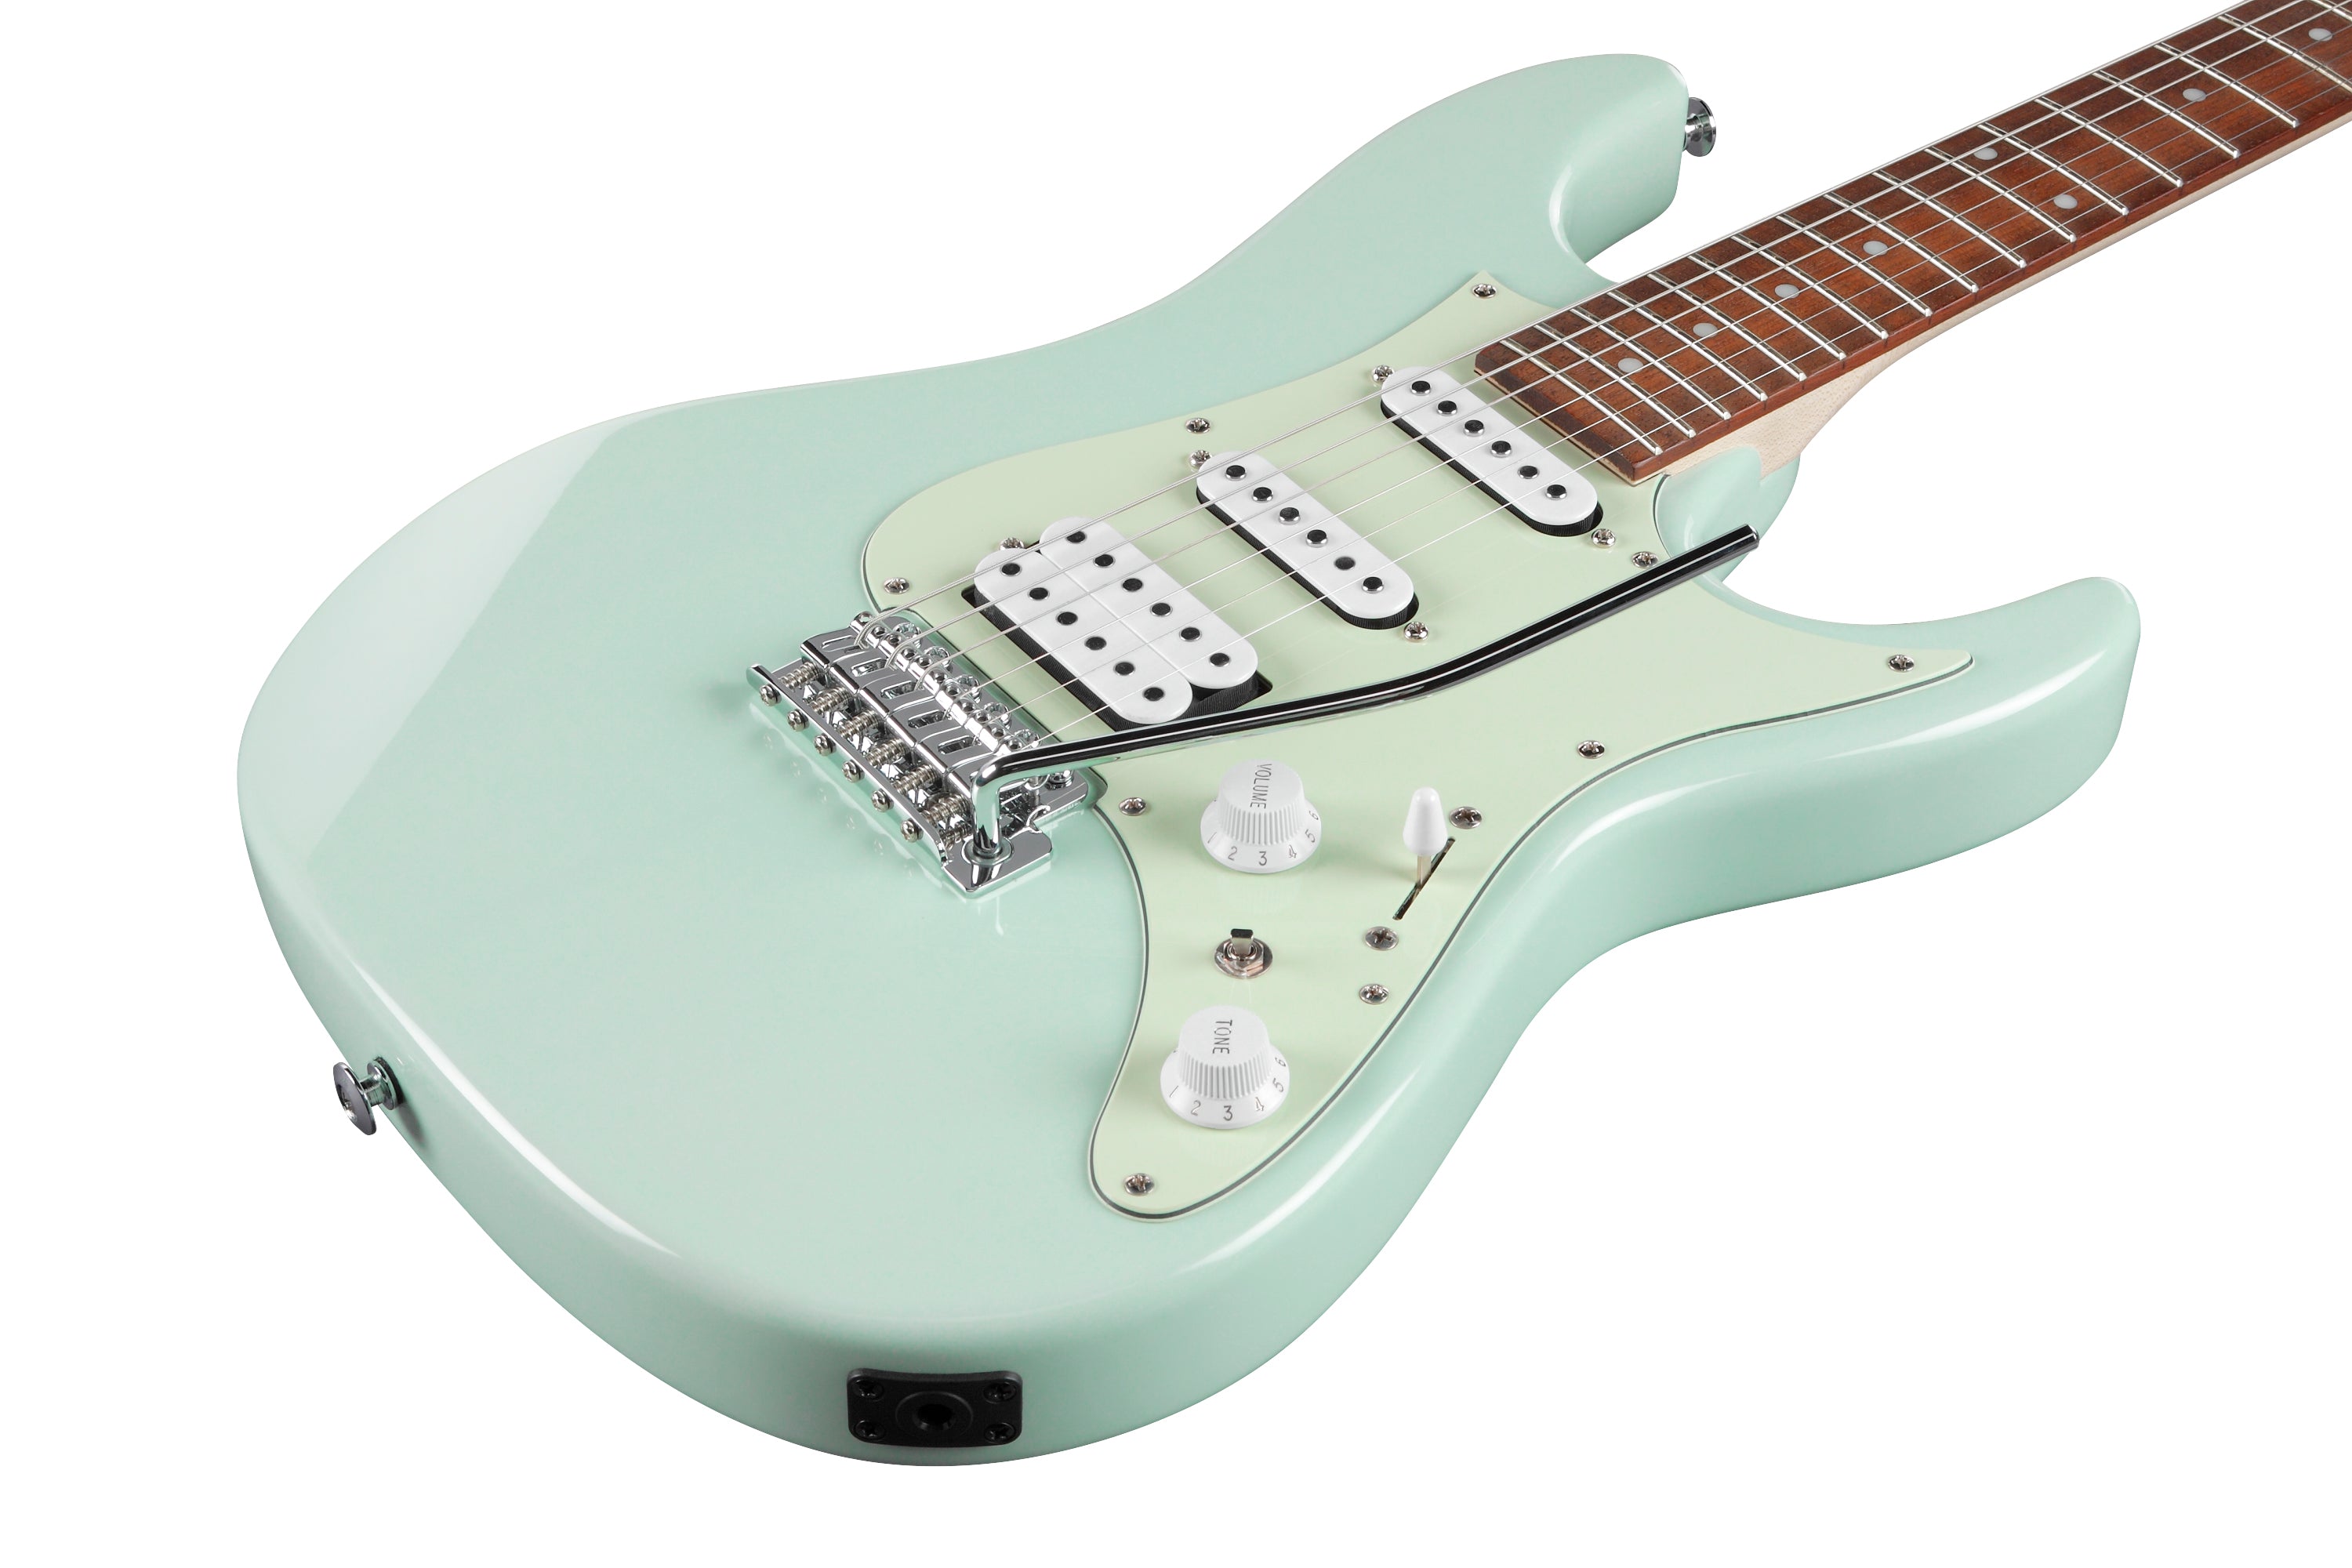 IBANEZ AZES40 Electric Guitar (MGR : Mint Green)